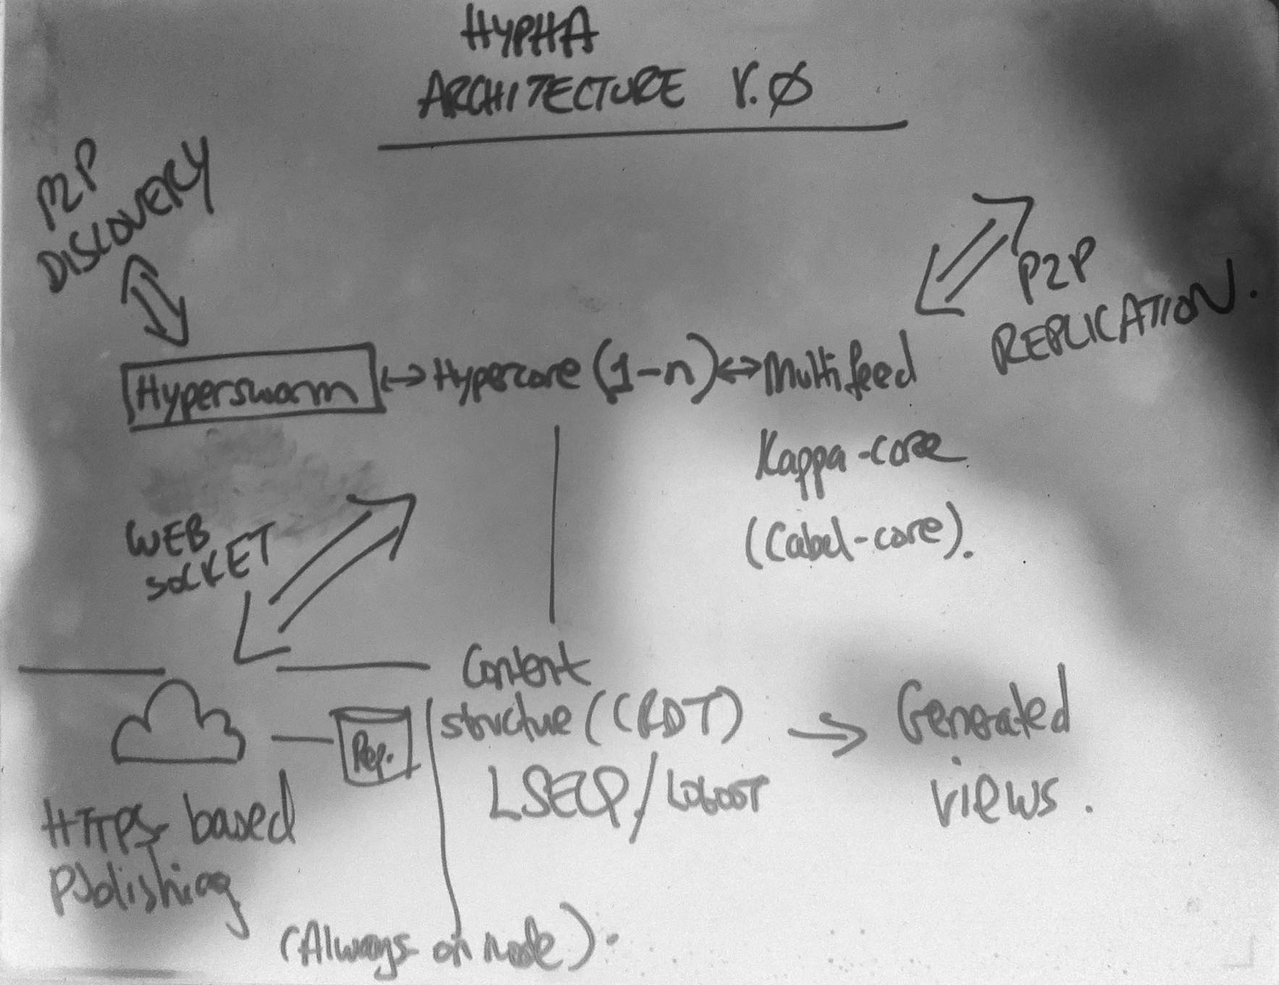 One of the images captured by the Blackboard app: black on white, Hypha plans.